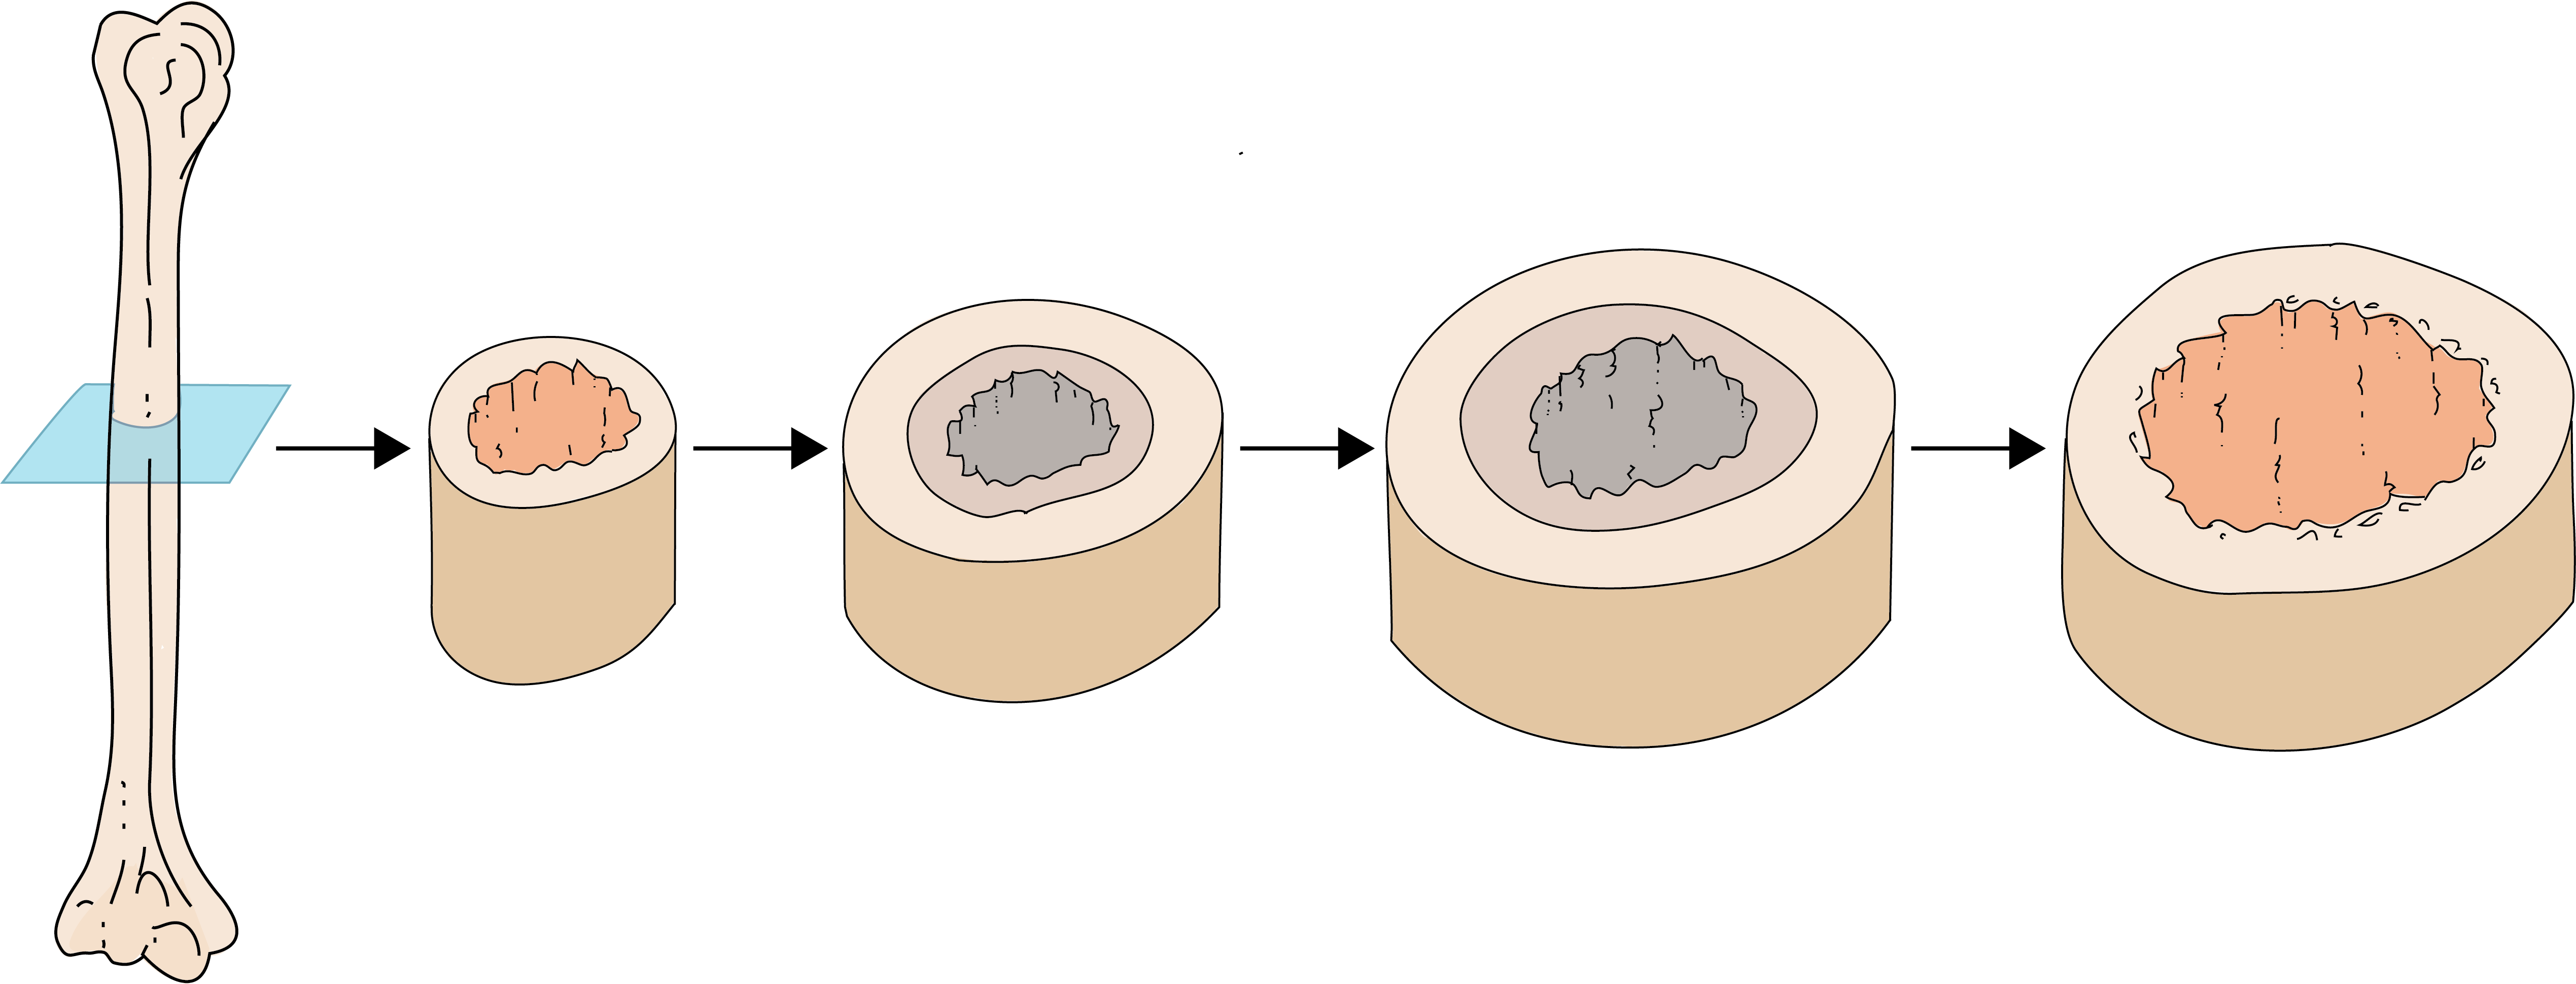 transverse section of bone growing in diameter over time